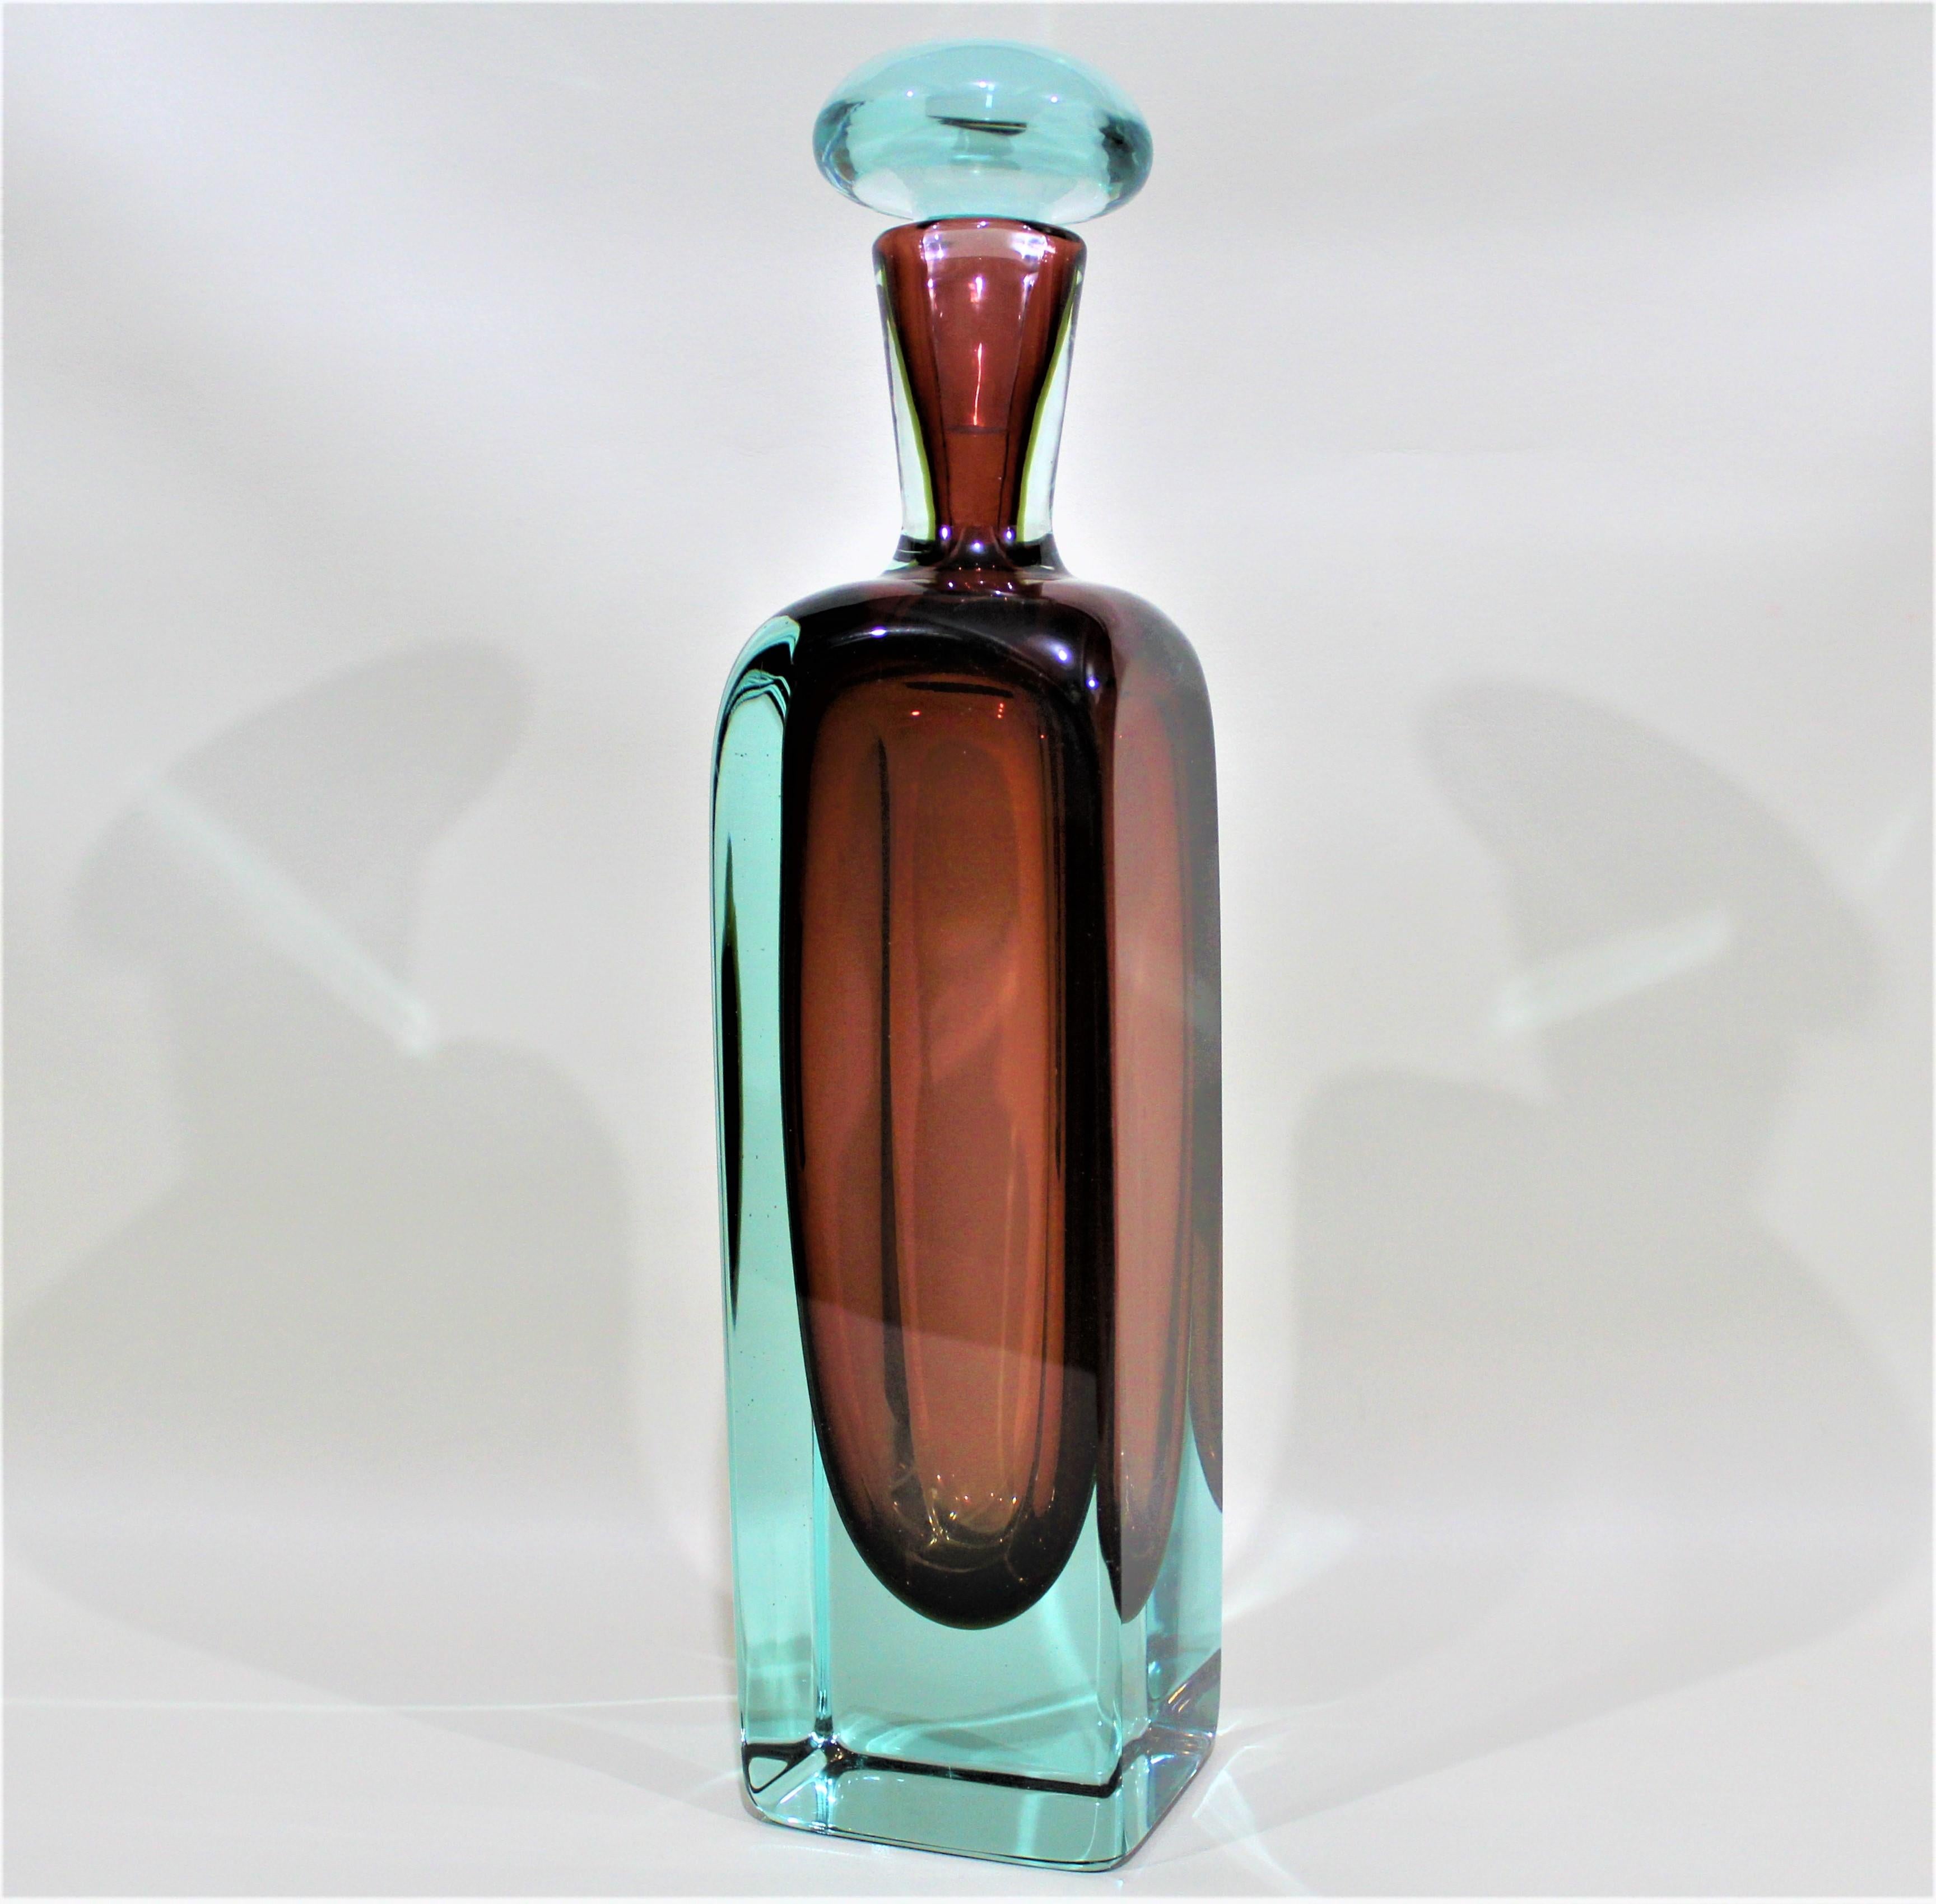 This heavy art glass bottle is unsigned and not labeled, but consistent with the style of the Italian Murano artist Angelo Seguso. This substantial art glass bottle is done in a thick ice blue outer layer which encases and compliments the deep red